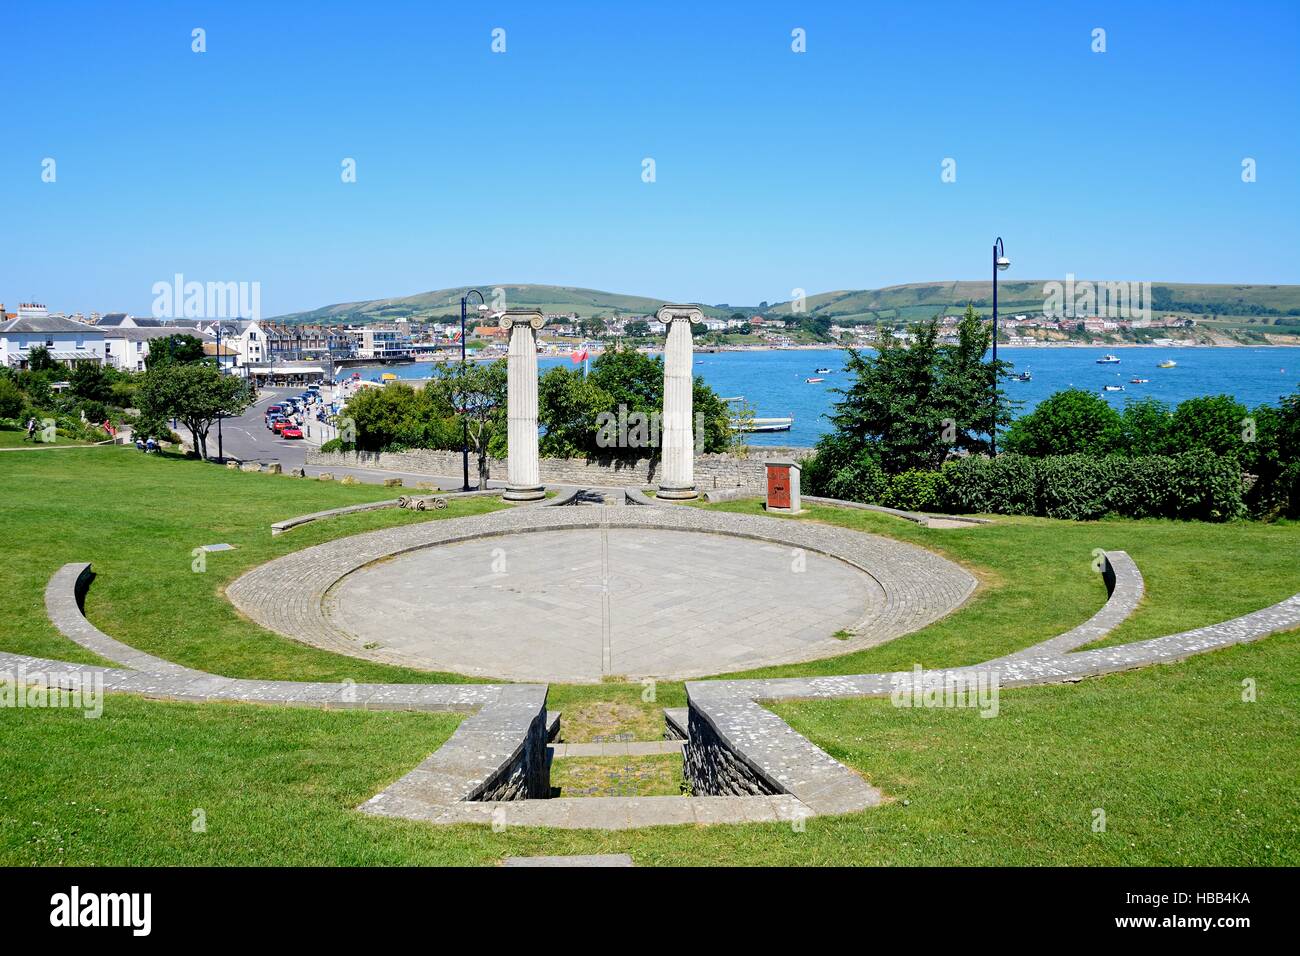 Contemporary mock Roman ampitheatre with views of the town and sea to the rear, Swanage, Dorset, England, UK, Western Europe. Stock Photo